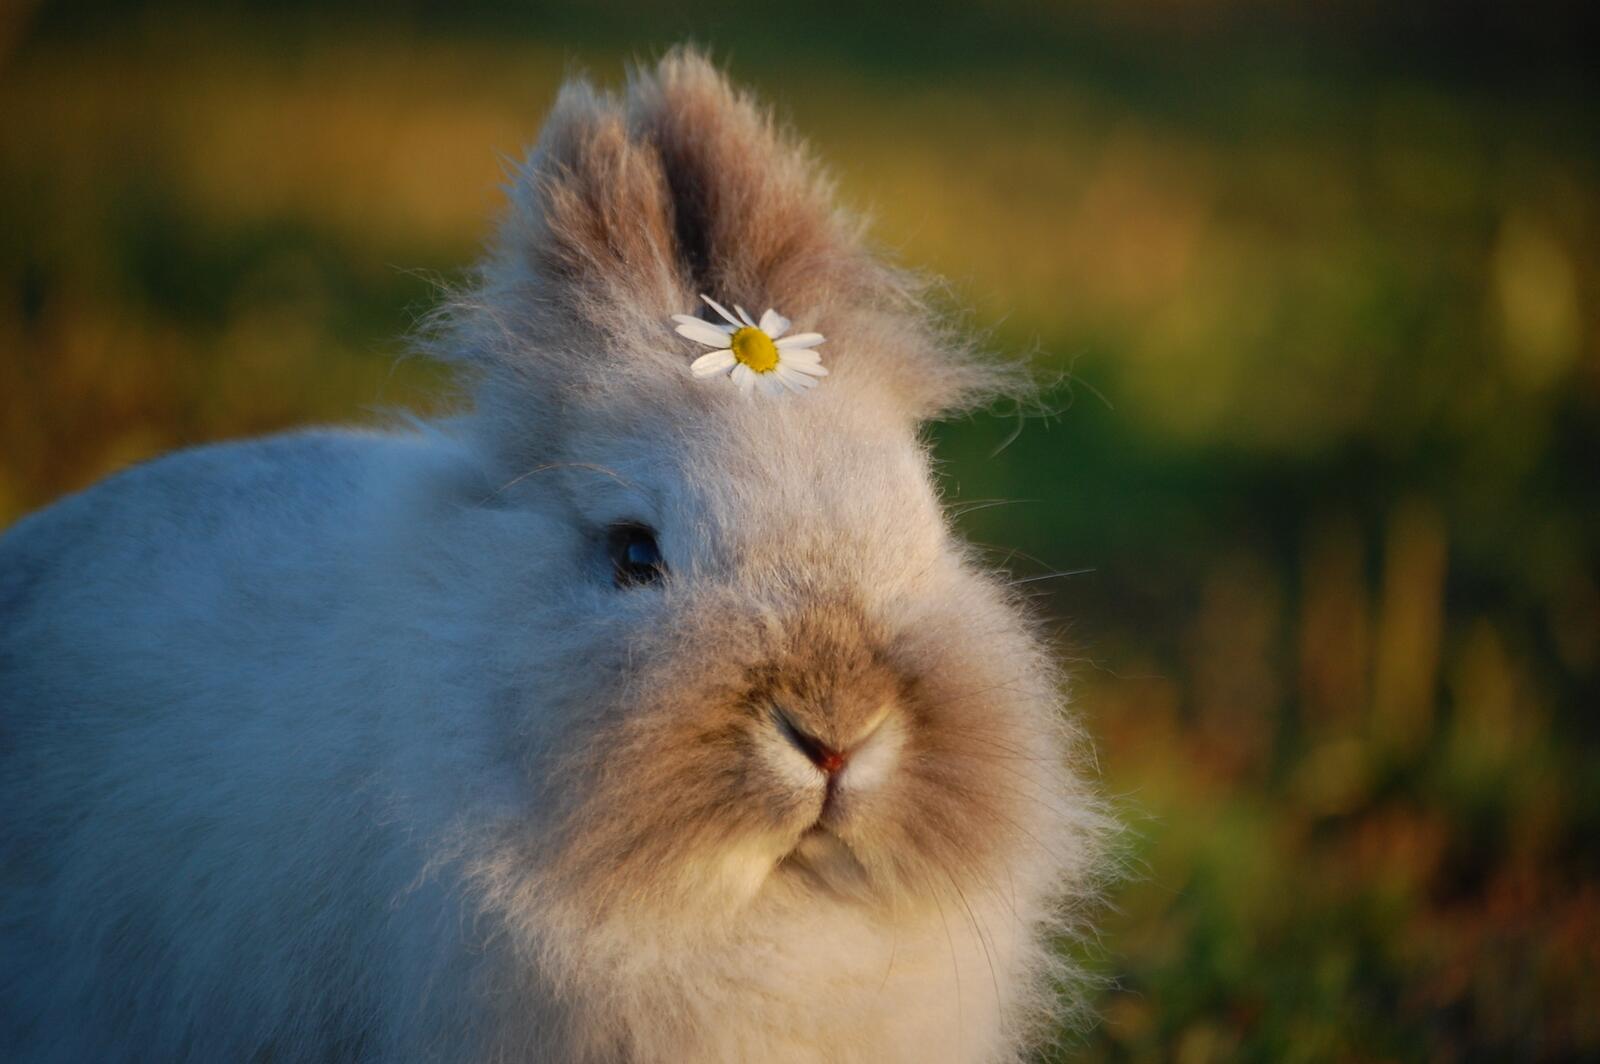 Free photo A cute bunny with a daisy between his ears.